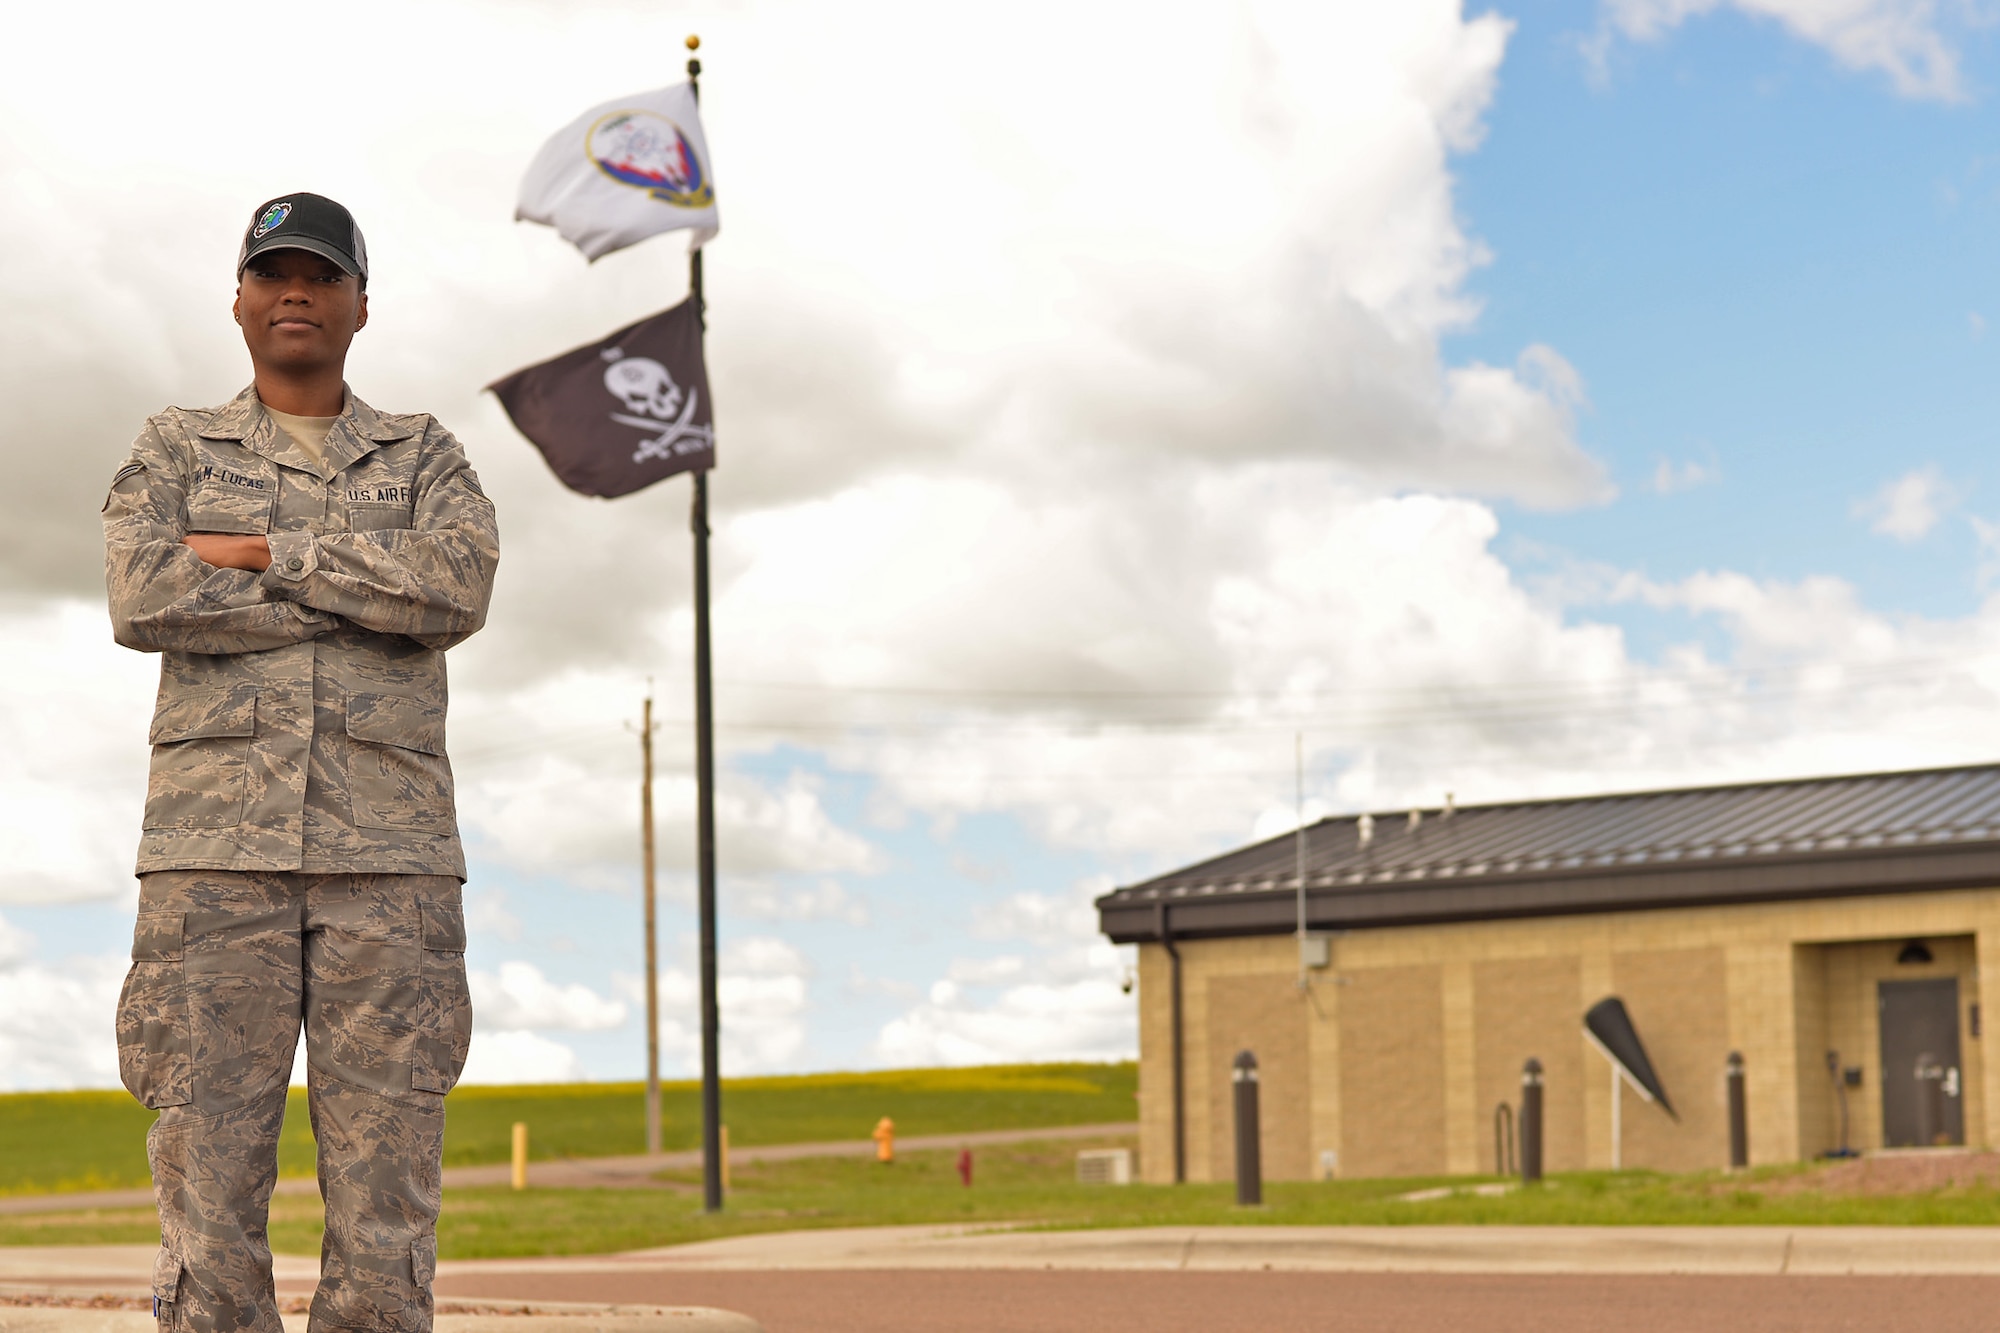 Senior Airman Jasmine Helm-Lucas, 341st Munitions Squadron munitions controller, poses for a photo June 19, 2017, at Malmstrom Air Force Base, Mont. Helm-Lucas acts as a gatekeeper for granting maintenance Airmen access to the weapons storage area where they will perform maintenance on reentry systems and vehicles. (U.S. Air Force photo/Airman 1st Class Daniel Brosam)